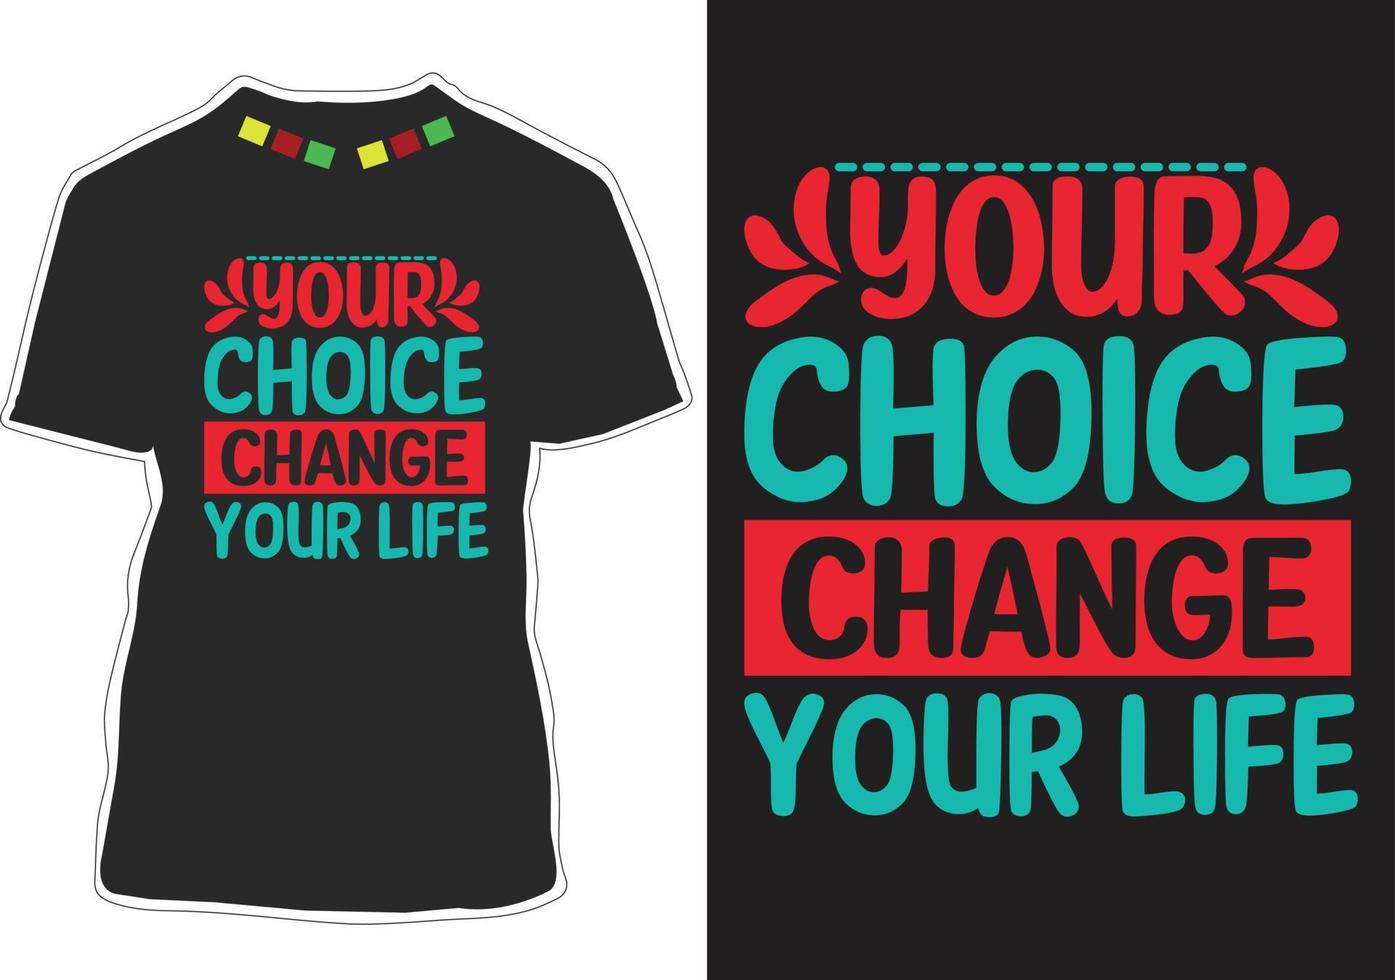 Your choice change your life Motivational quotes t-shirt design vector